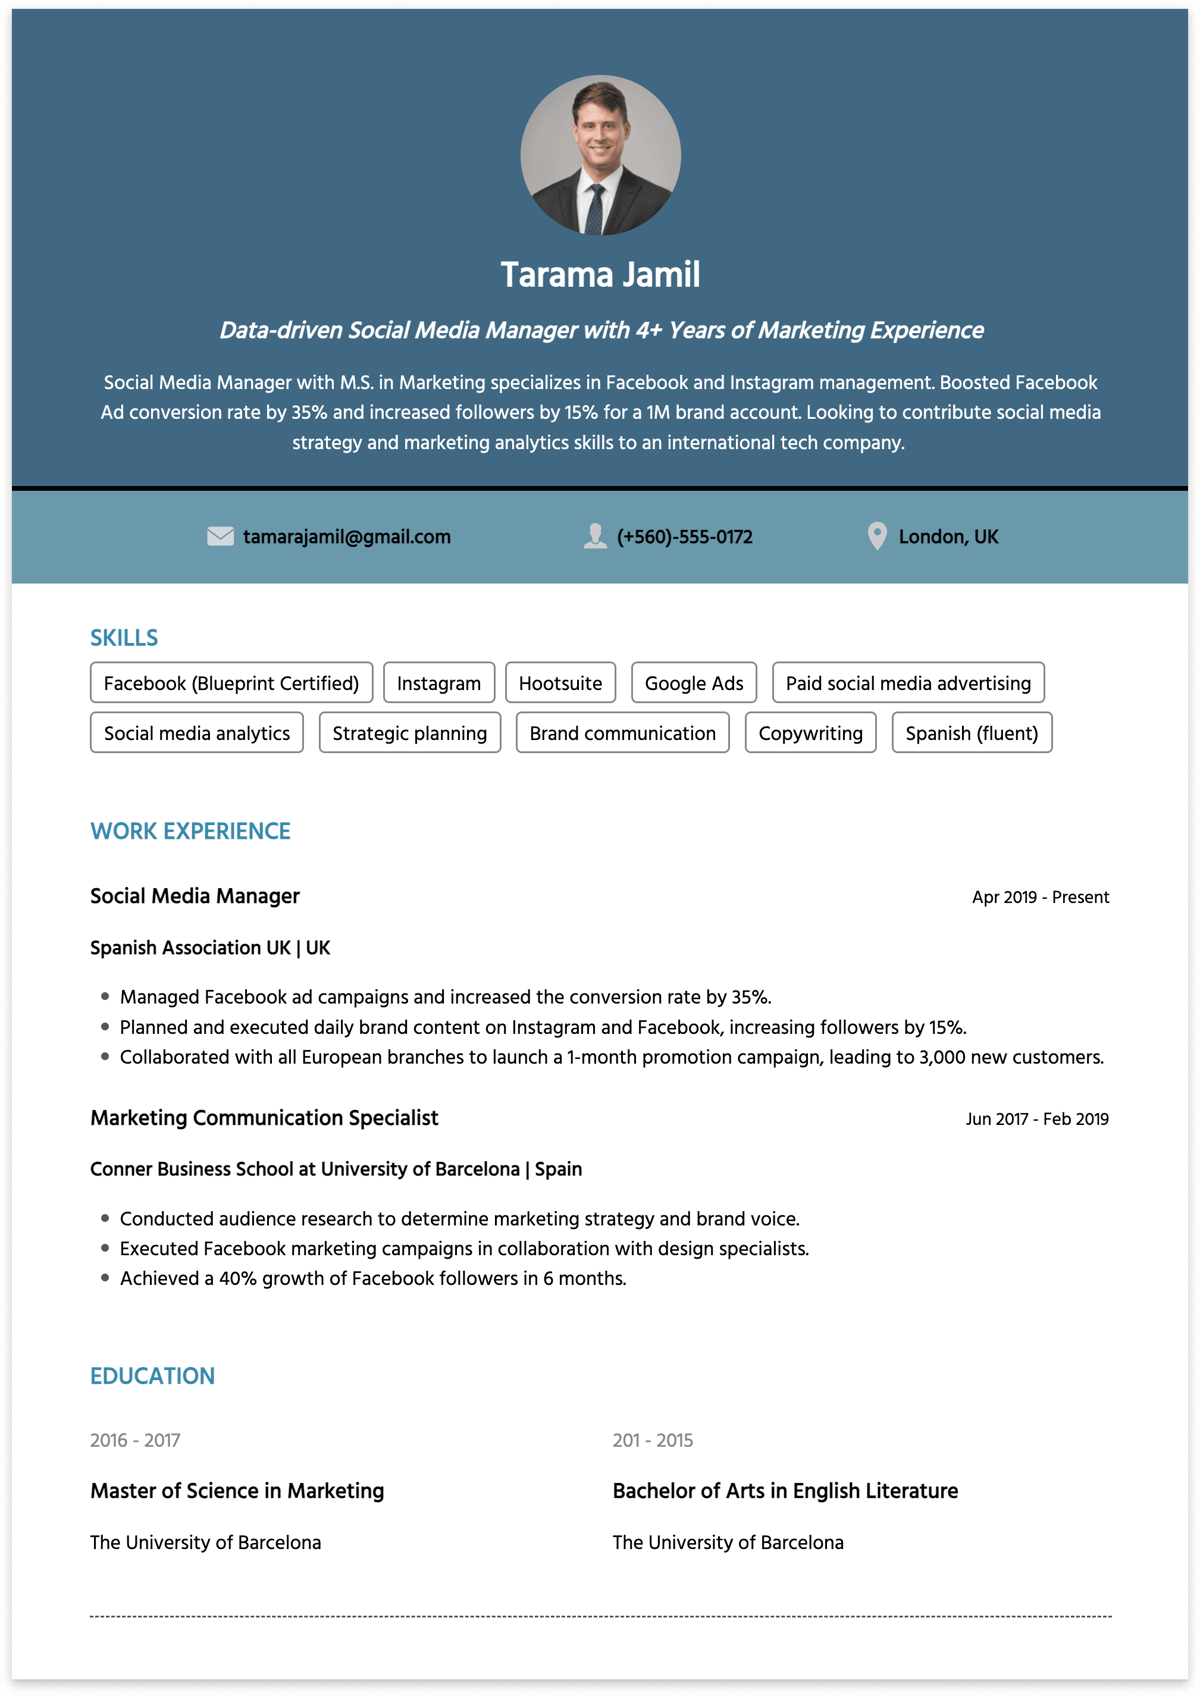 social media manager resume example